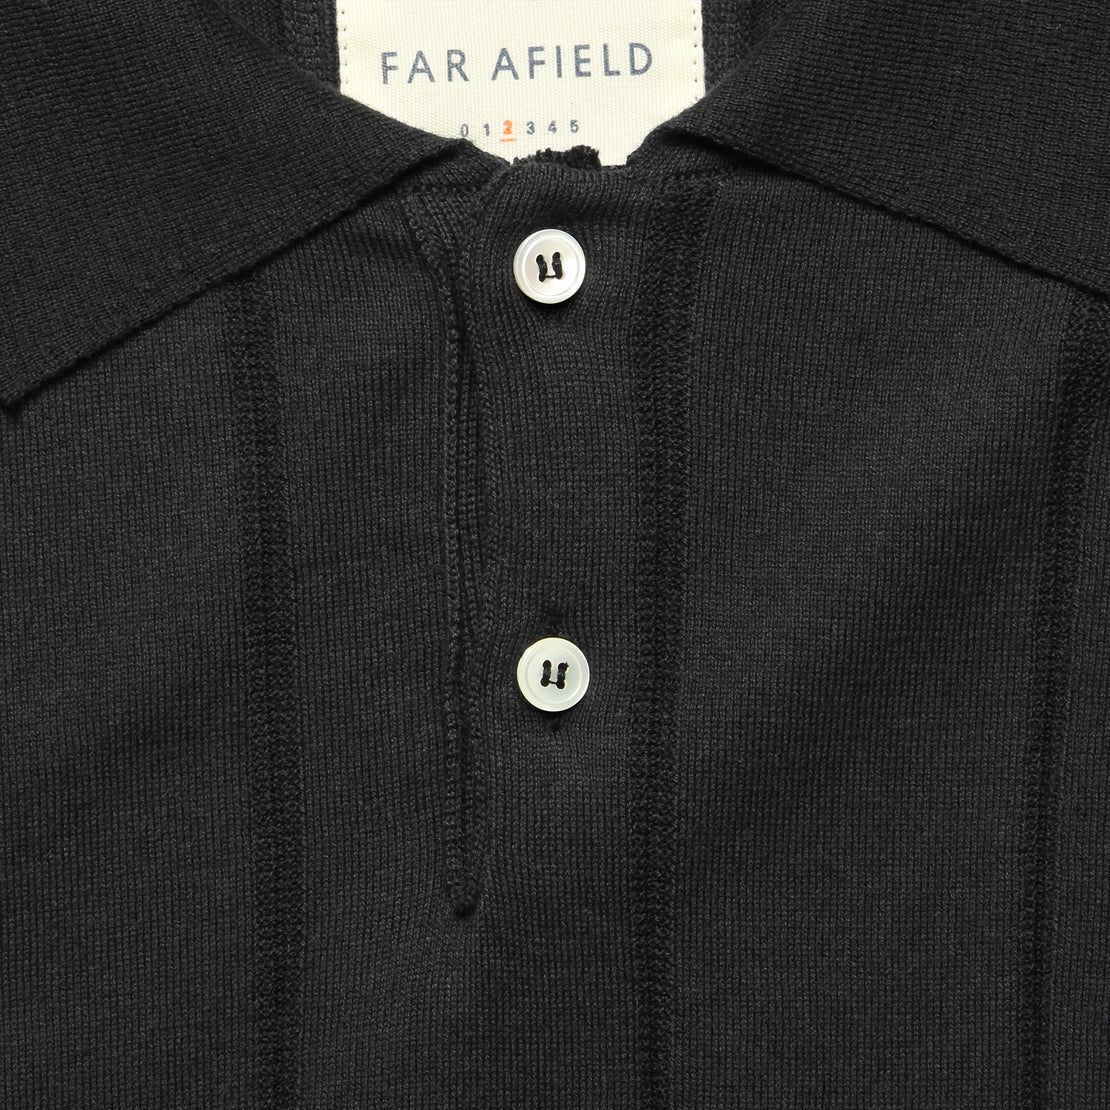 Knit Jacobs Polo - Meteorite Black - Far Afield - STAG Provisions - Tops - S/S Knit